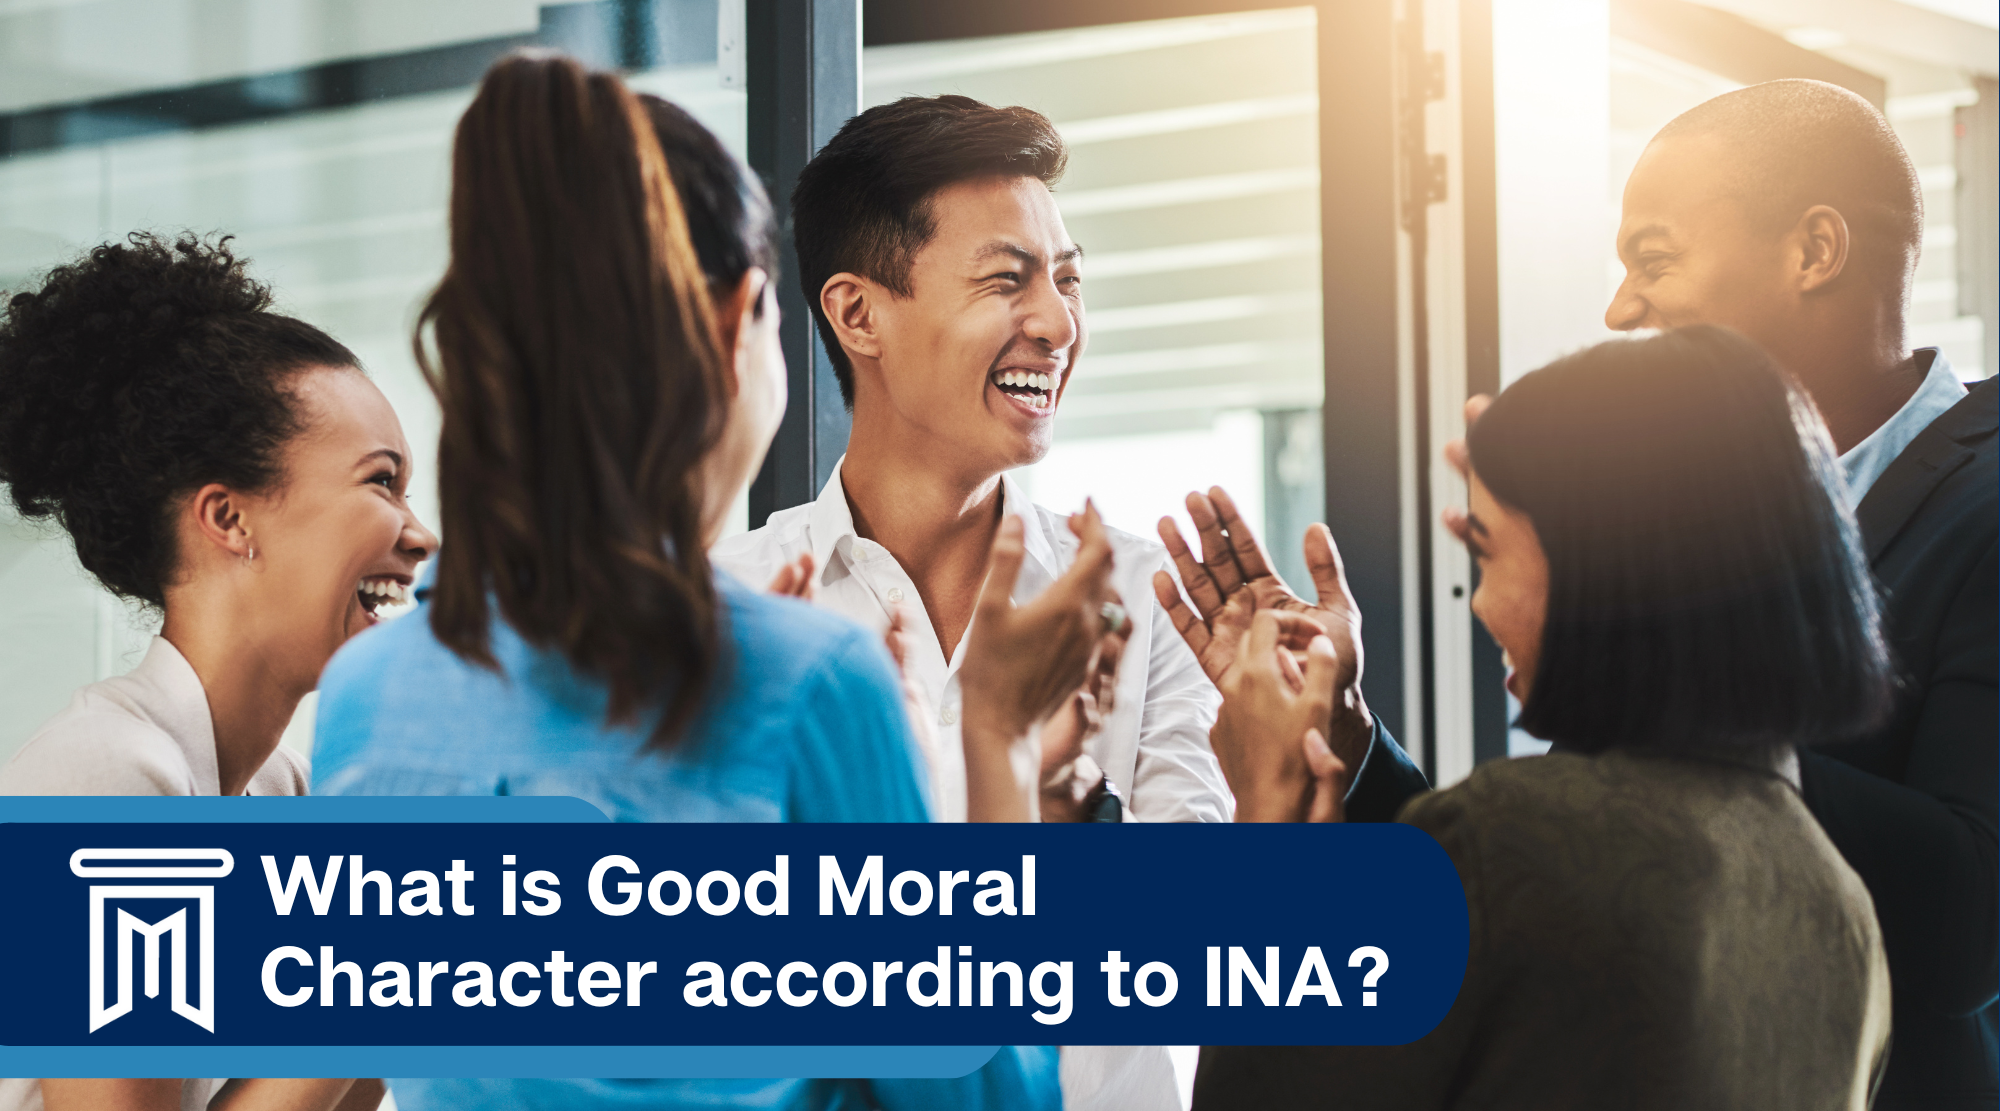 What is Good Moral Character according to INA?